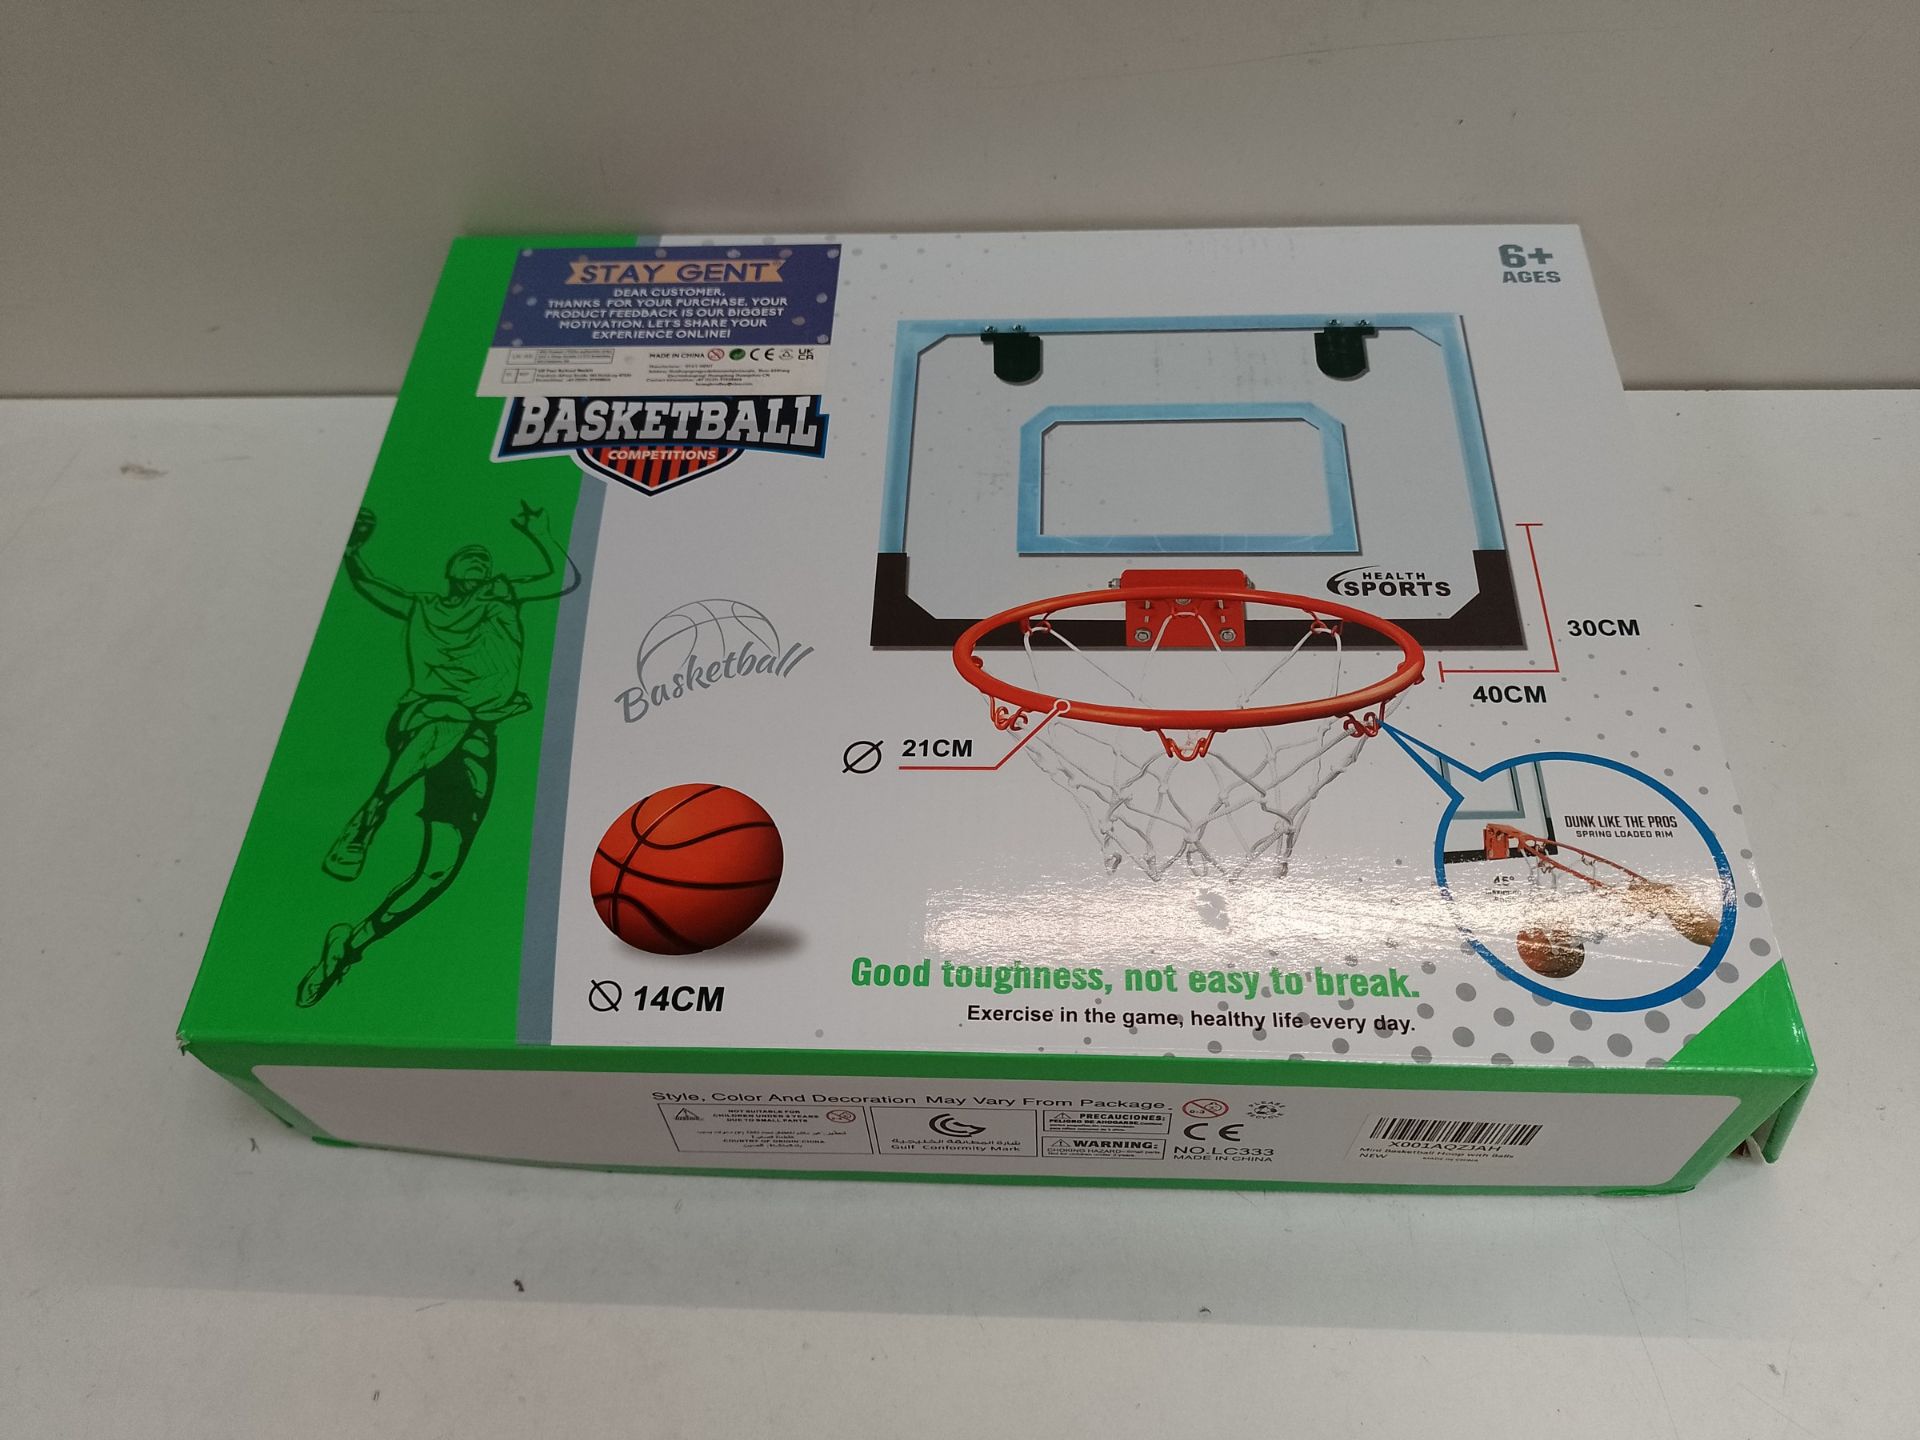 RRP £32.06 STAY GENT Mini Basketball Hoop for Kids and Adults - Image 2 of 2